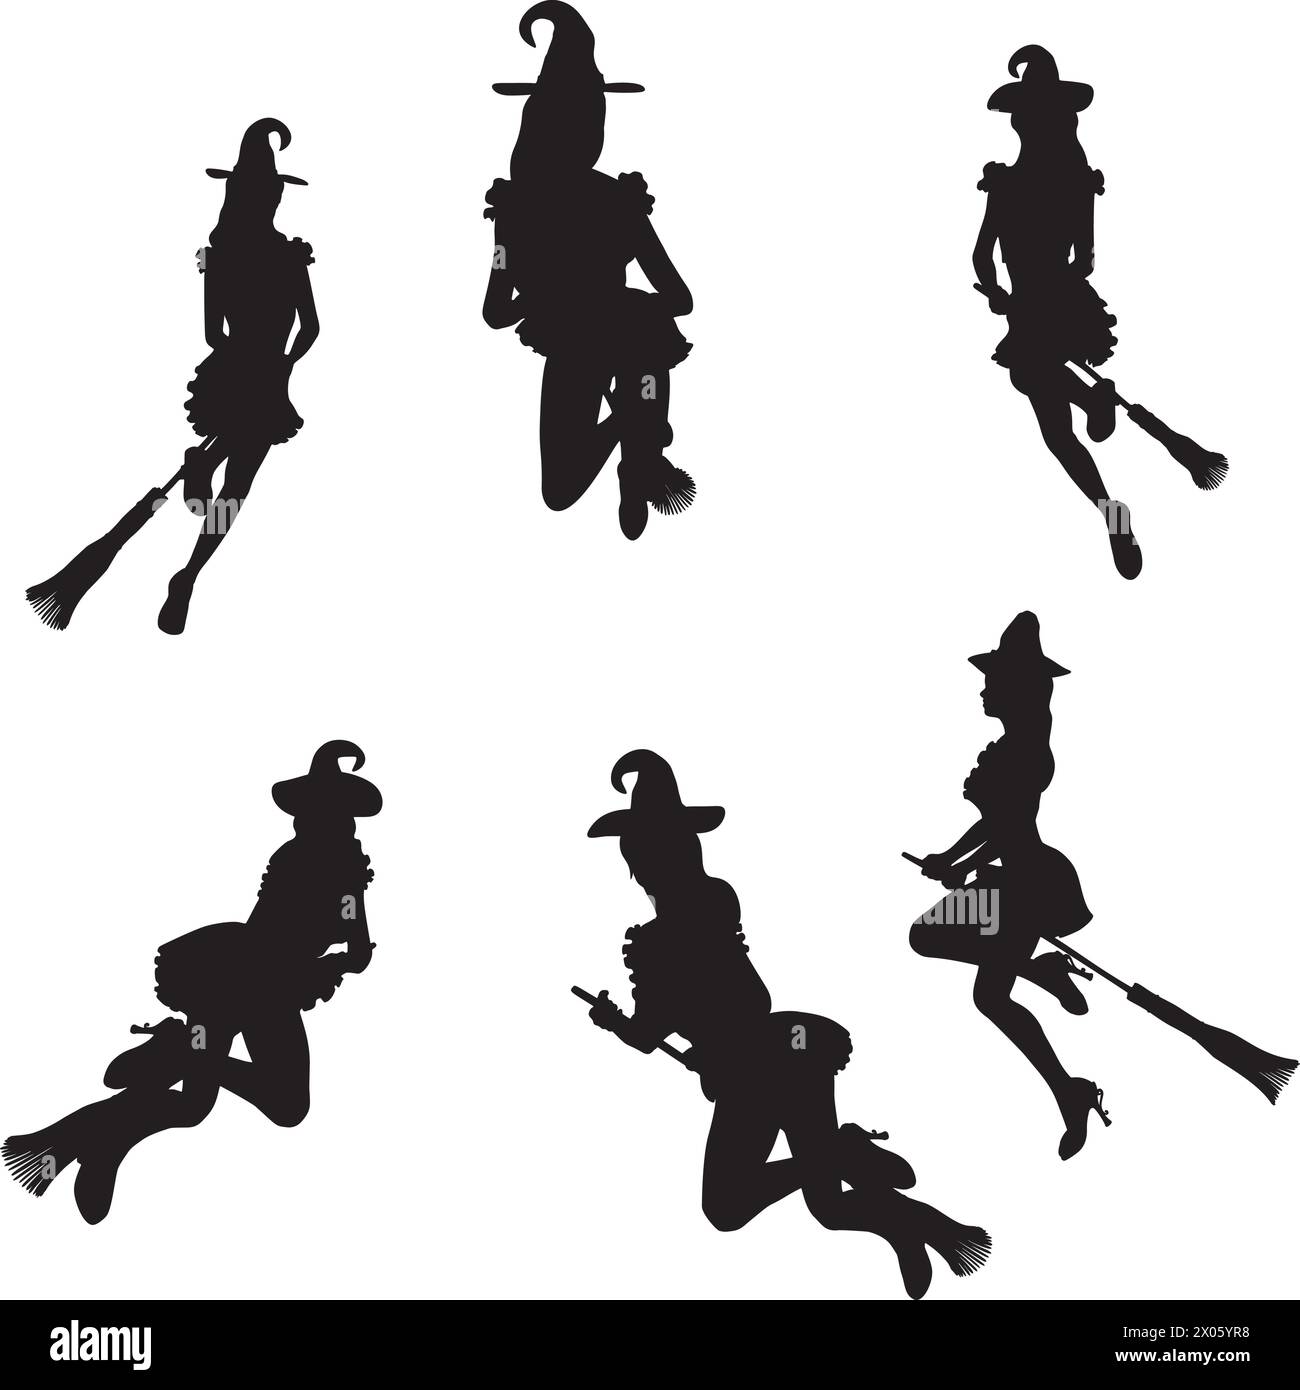 Detailed silhouette of with woman flying on broom illustration. Stock Vector